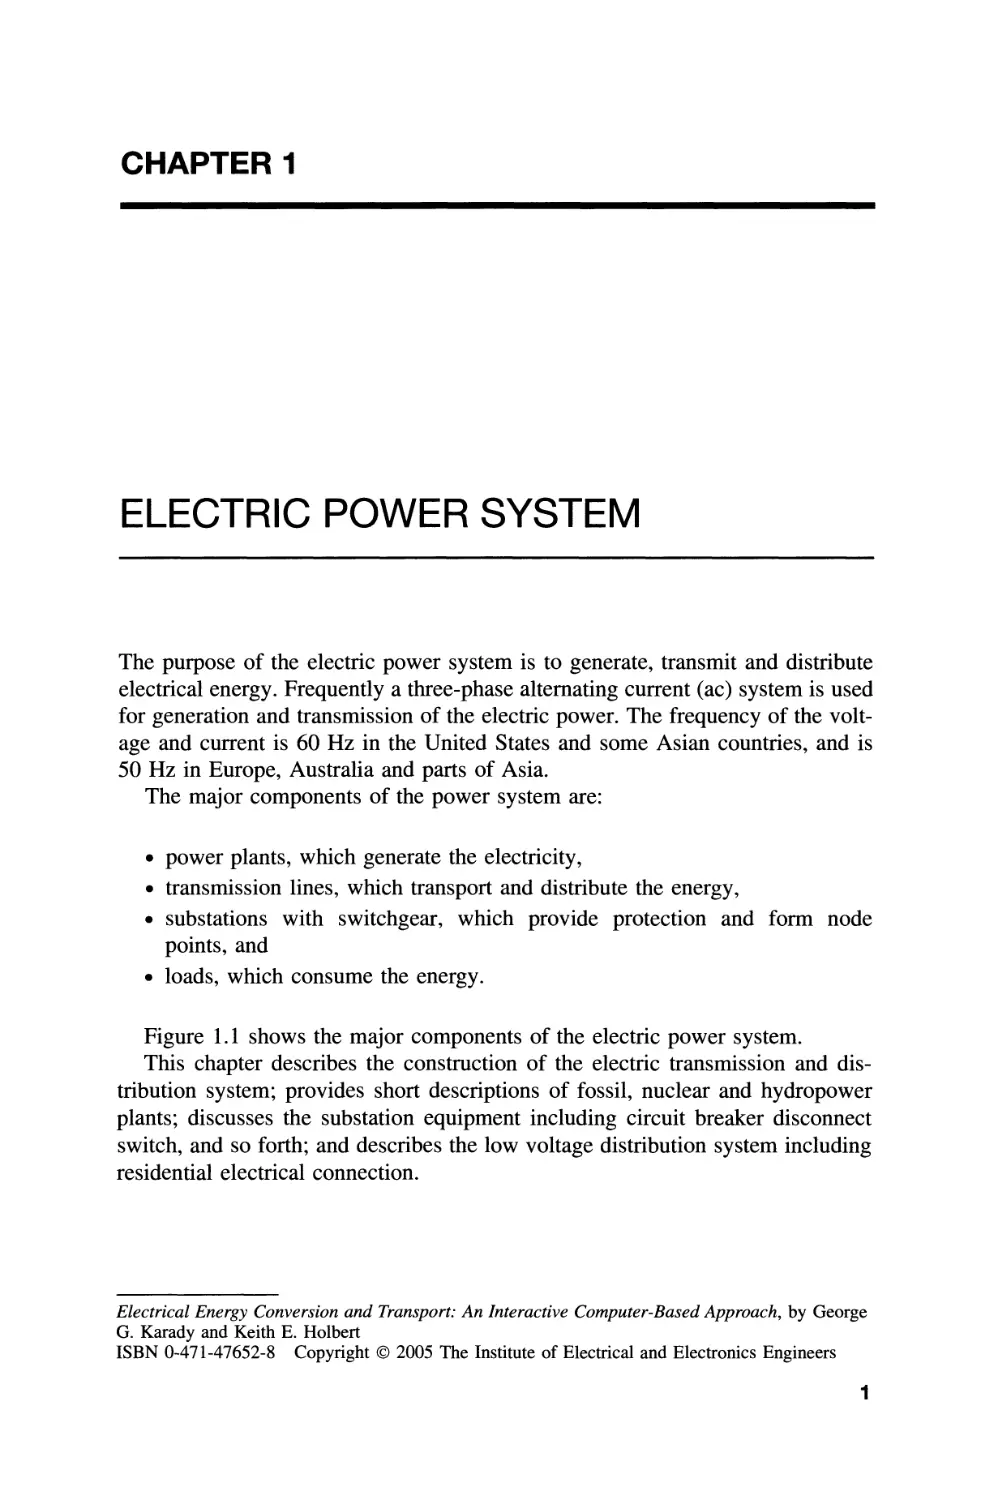 1 ELECTRIC POWER SYSTEM